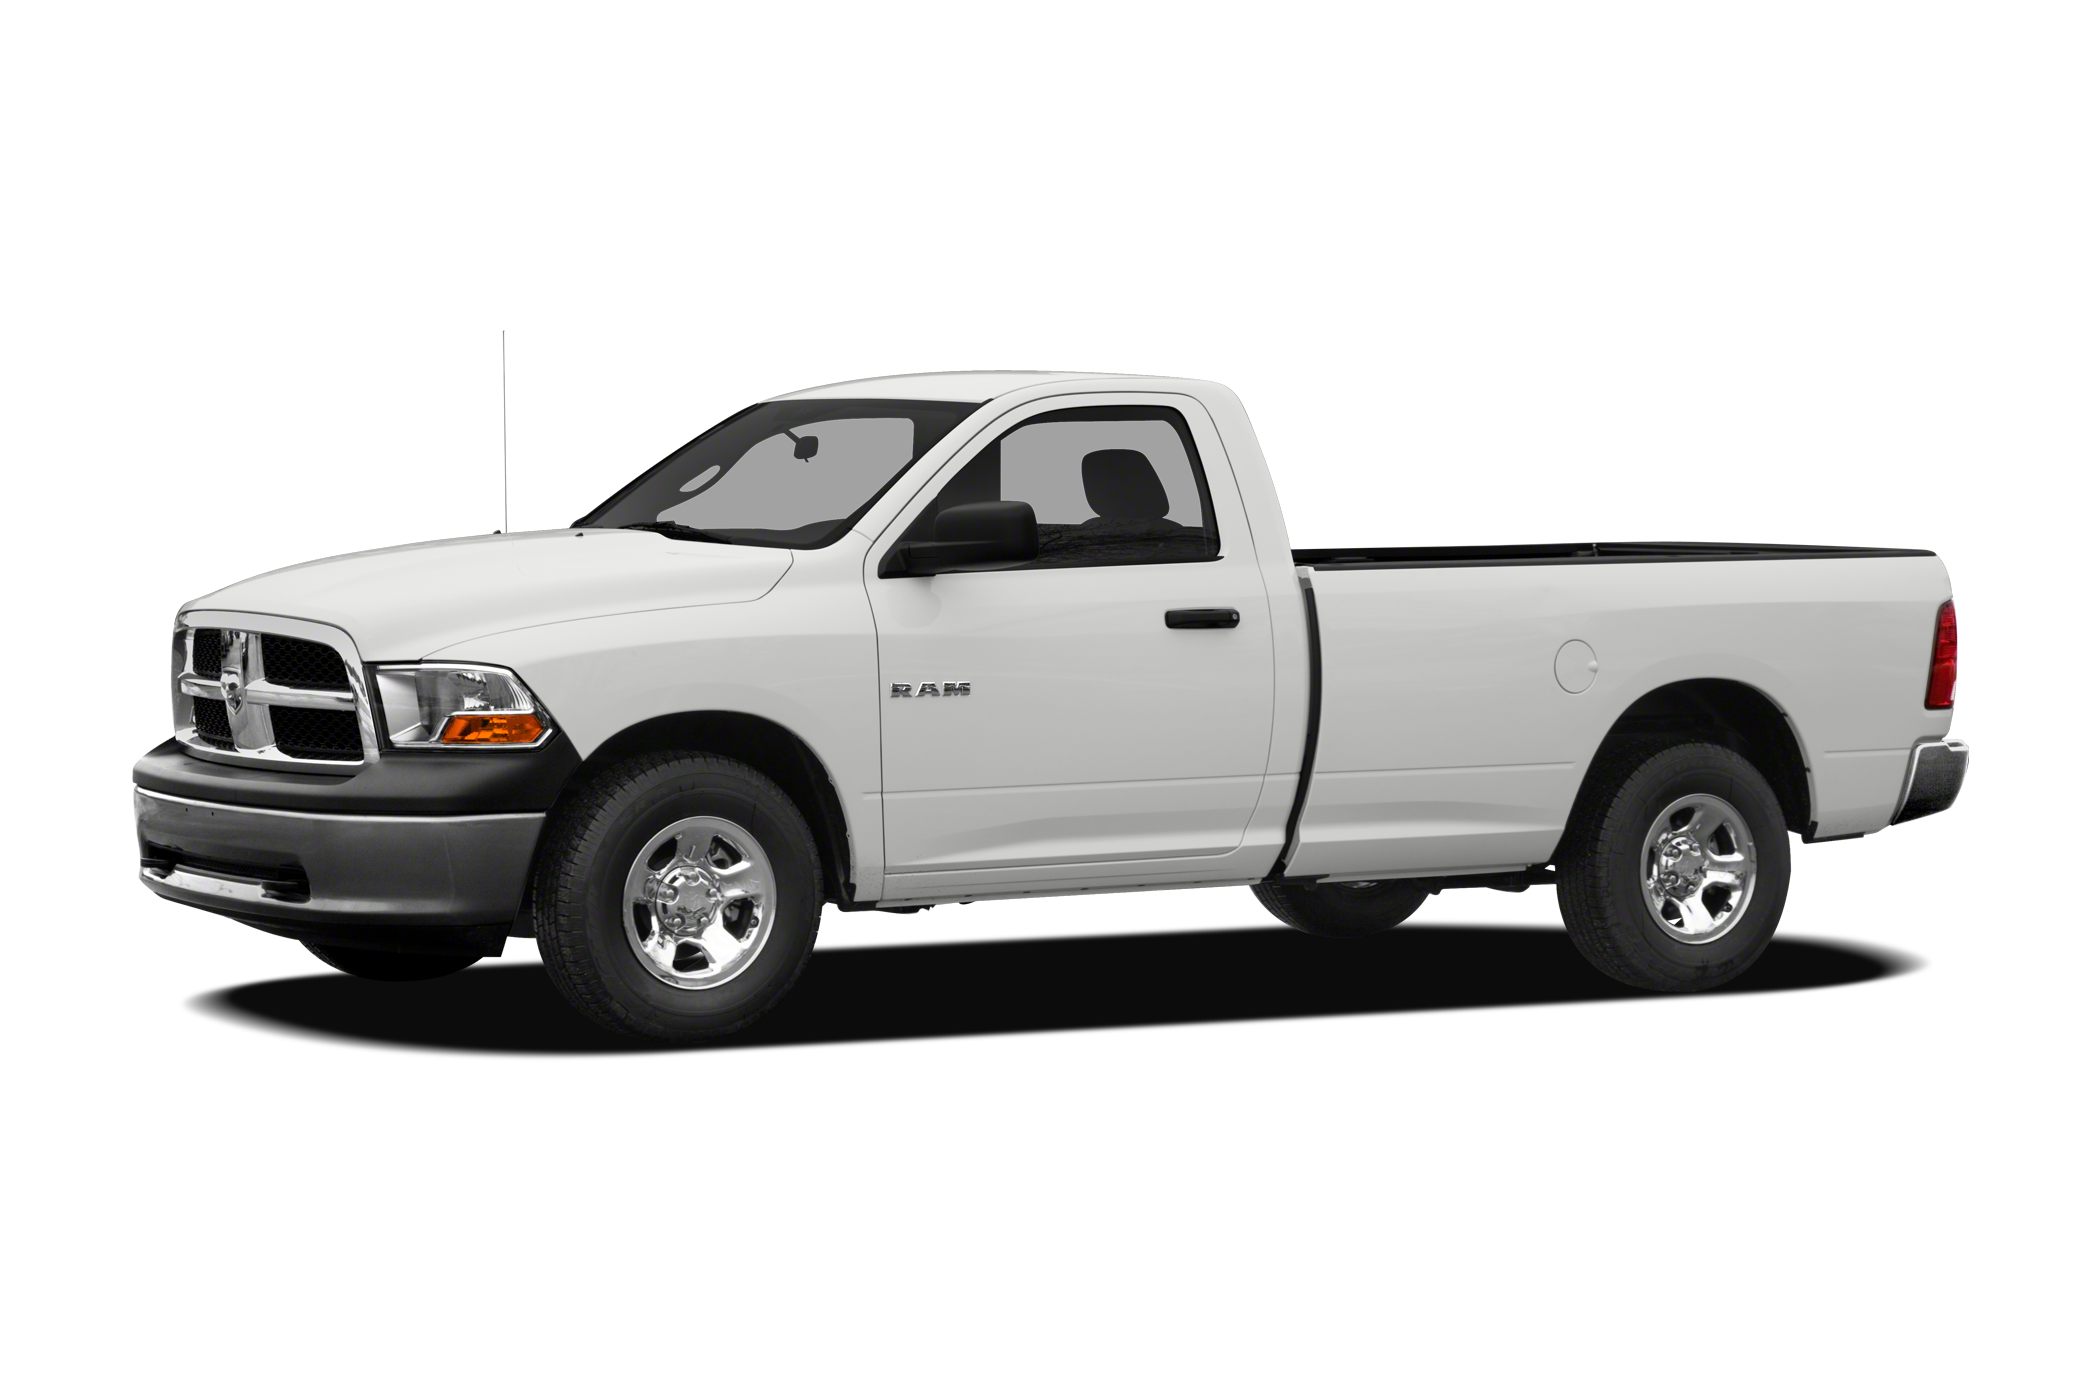 2012 Ram 1500 Tradesman Heavy Duty 4x2 Regular Cab 140 In Wb Pictures